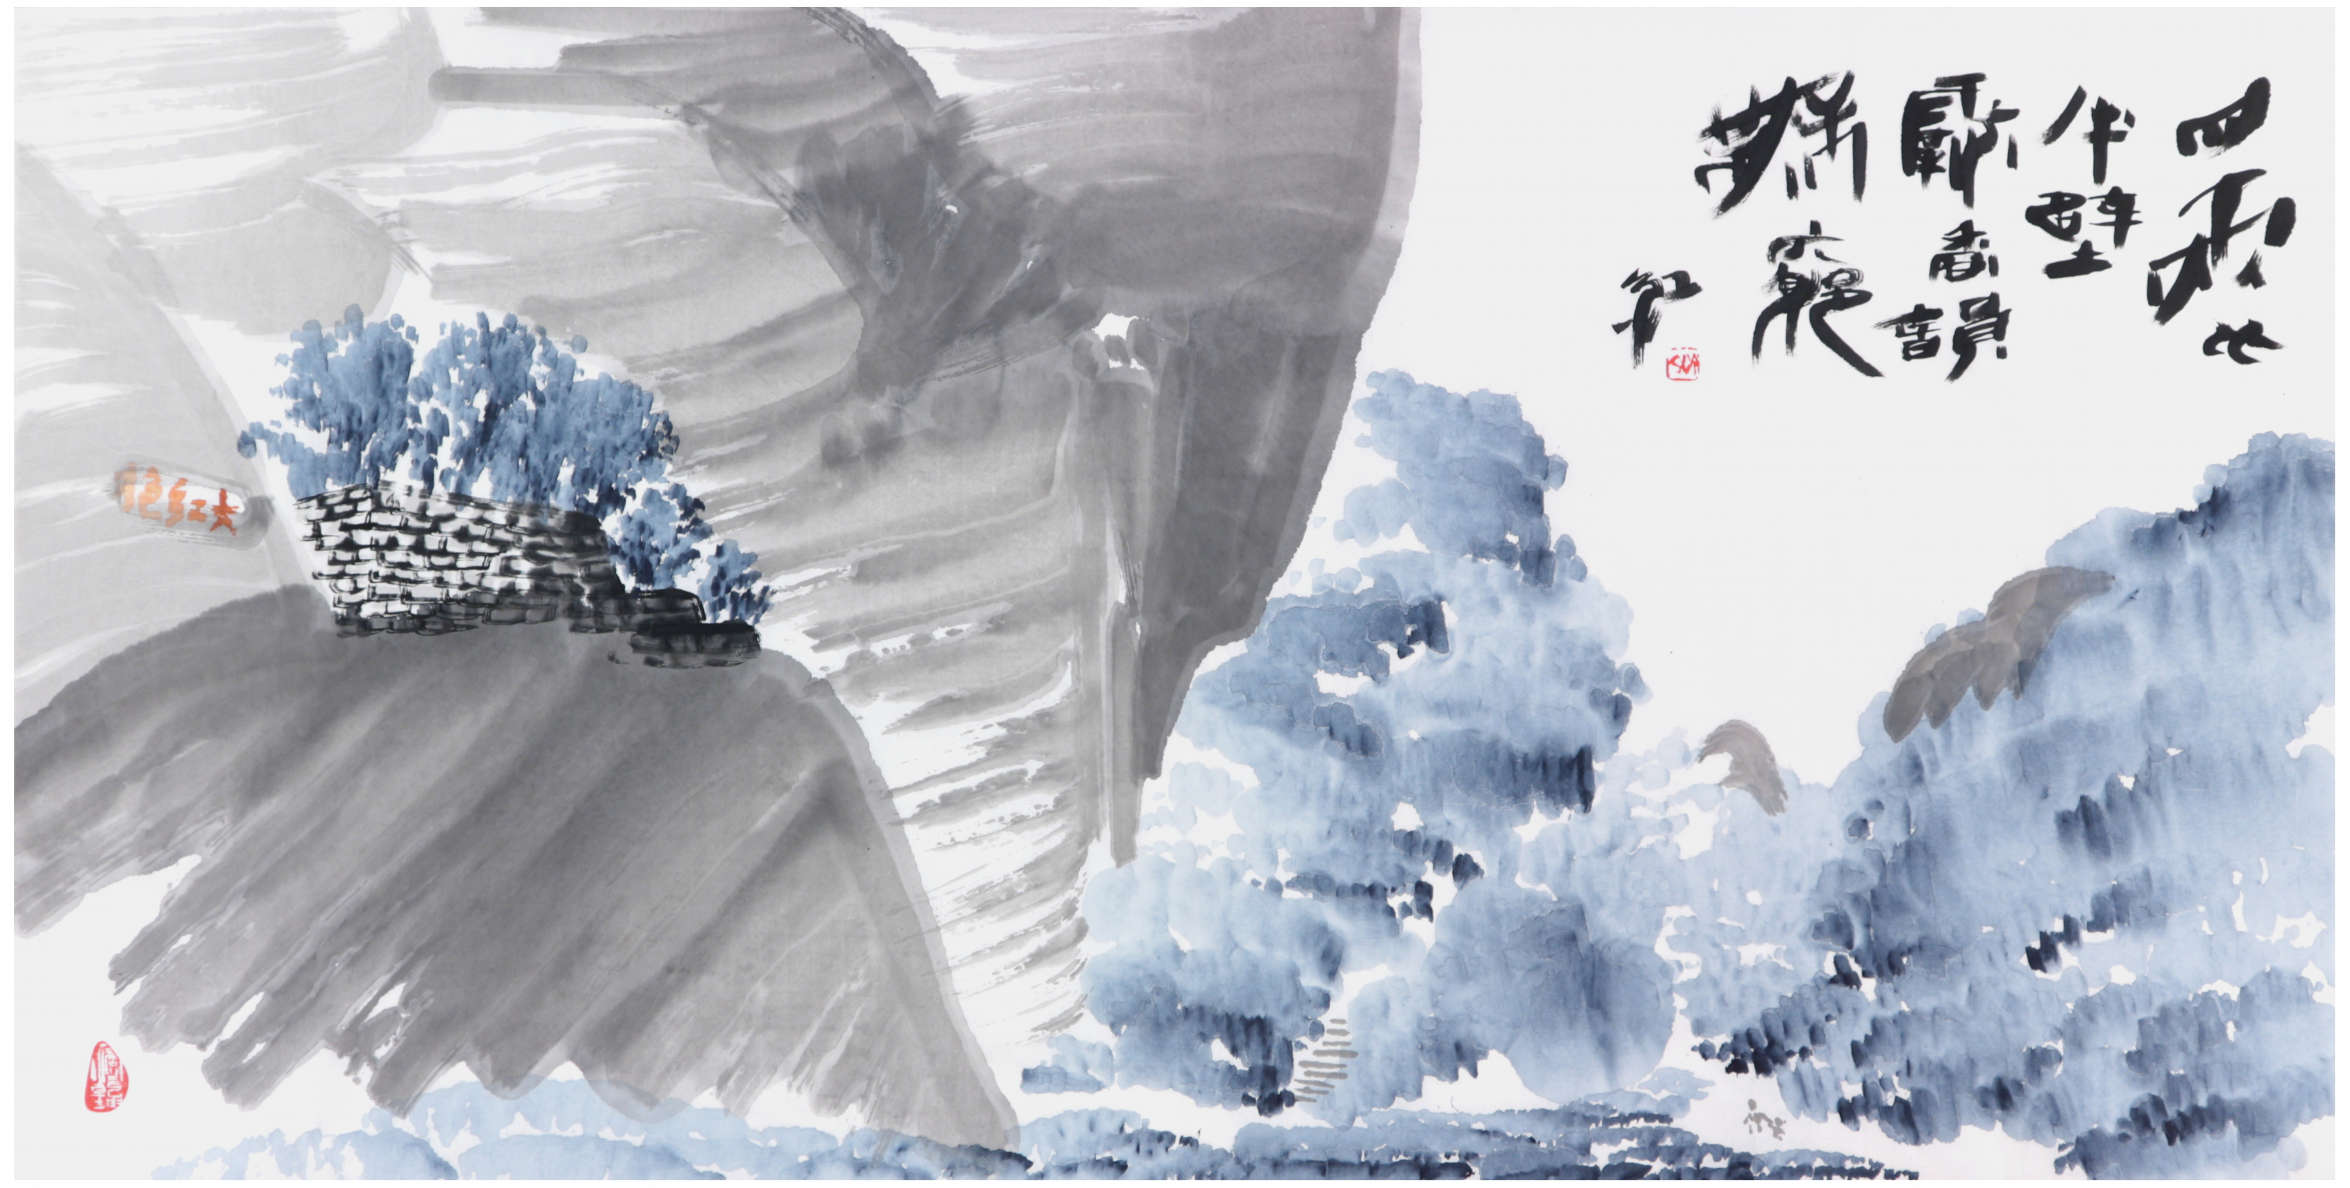 Sai Koh (Qi Hong)’s freehand brushwork Chinese painting (aka, landscape painting,  literati painting,  ink wash painting, ink painting, ink brush painting): Dahongpao Seed Trees in Mount Wuyi, 138×69cm, ink & color on Mian Liao Mian Lian Xuan paper